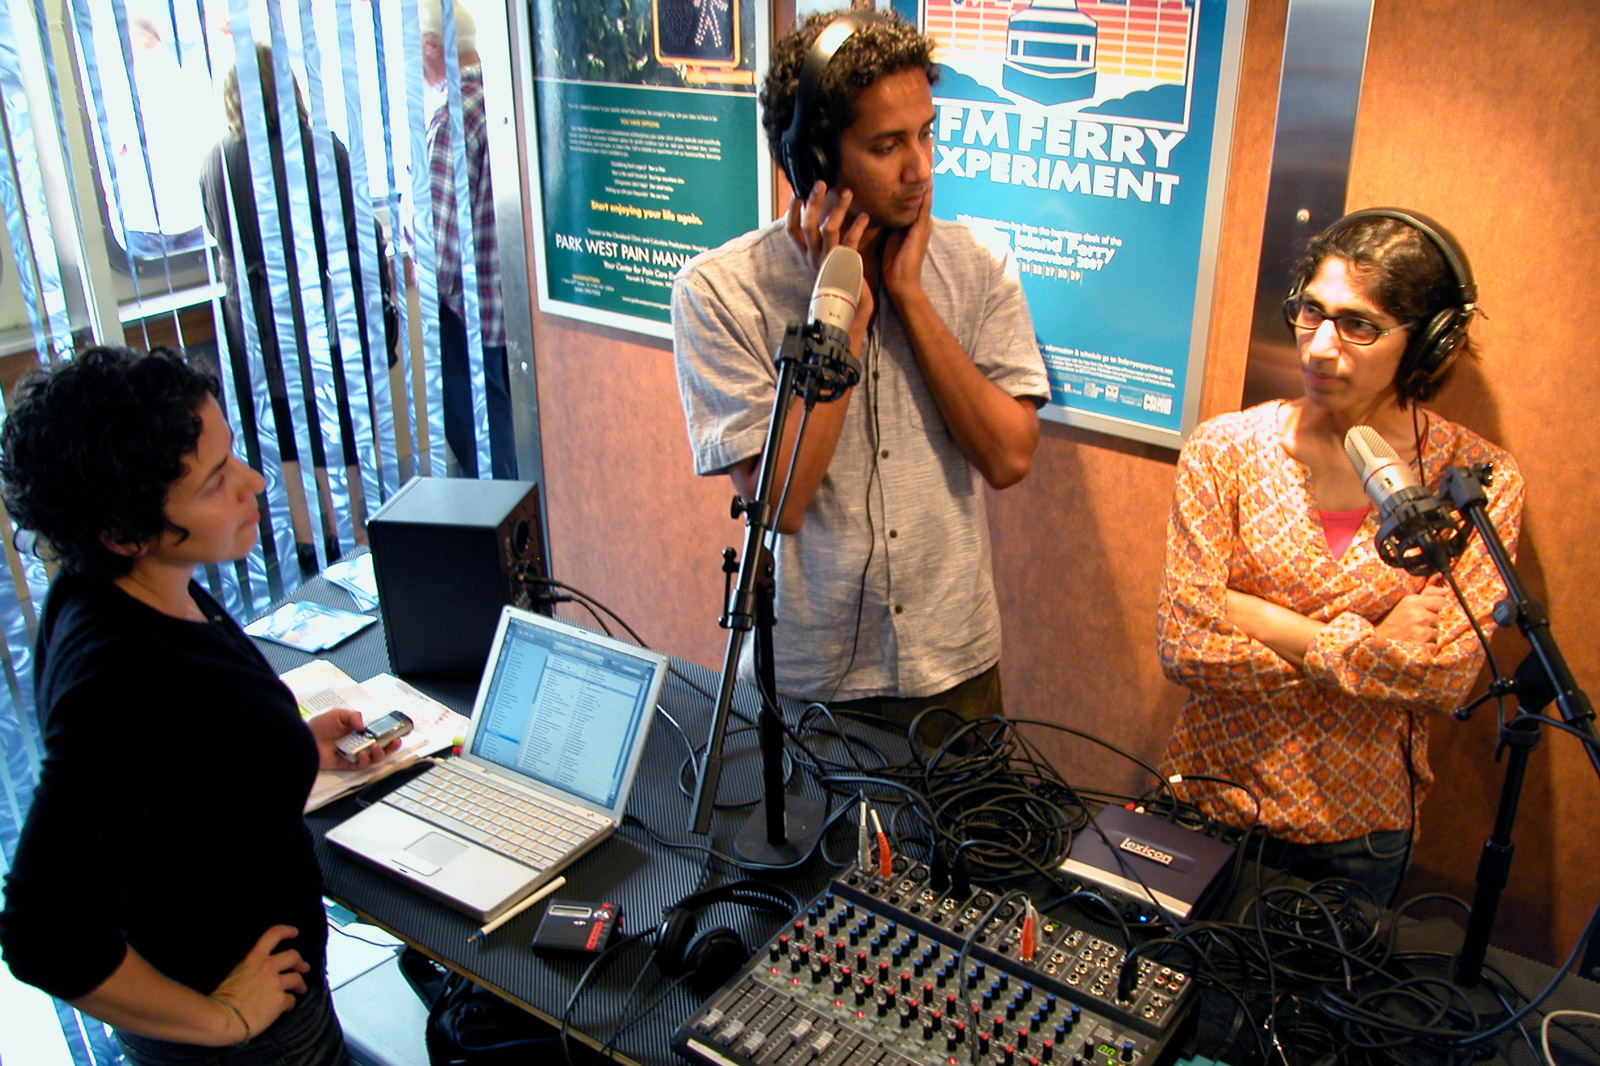 The FM Ferry Experiment studio on the John J. Marchi Staten Island Ferry. Image features (left to right) Valerie Tevere of neuroTransmitter and  on-air guests – Shreshta Premnath and Jesal Kapadia.